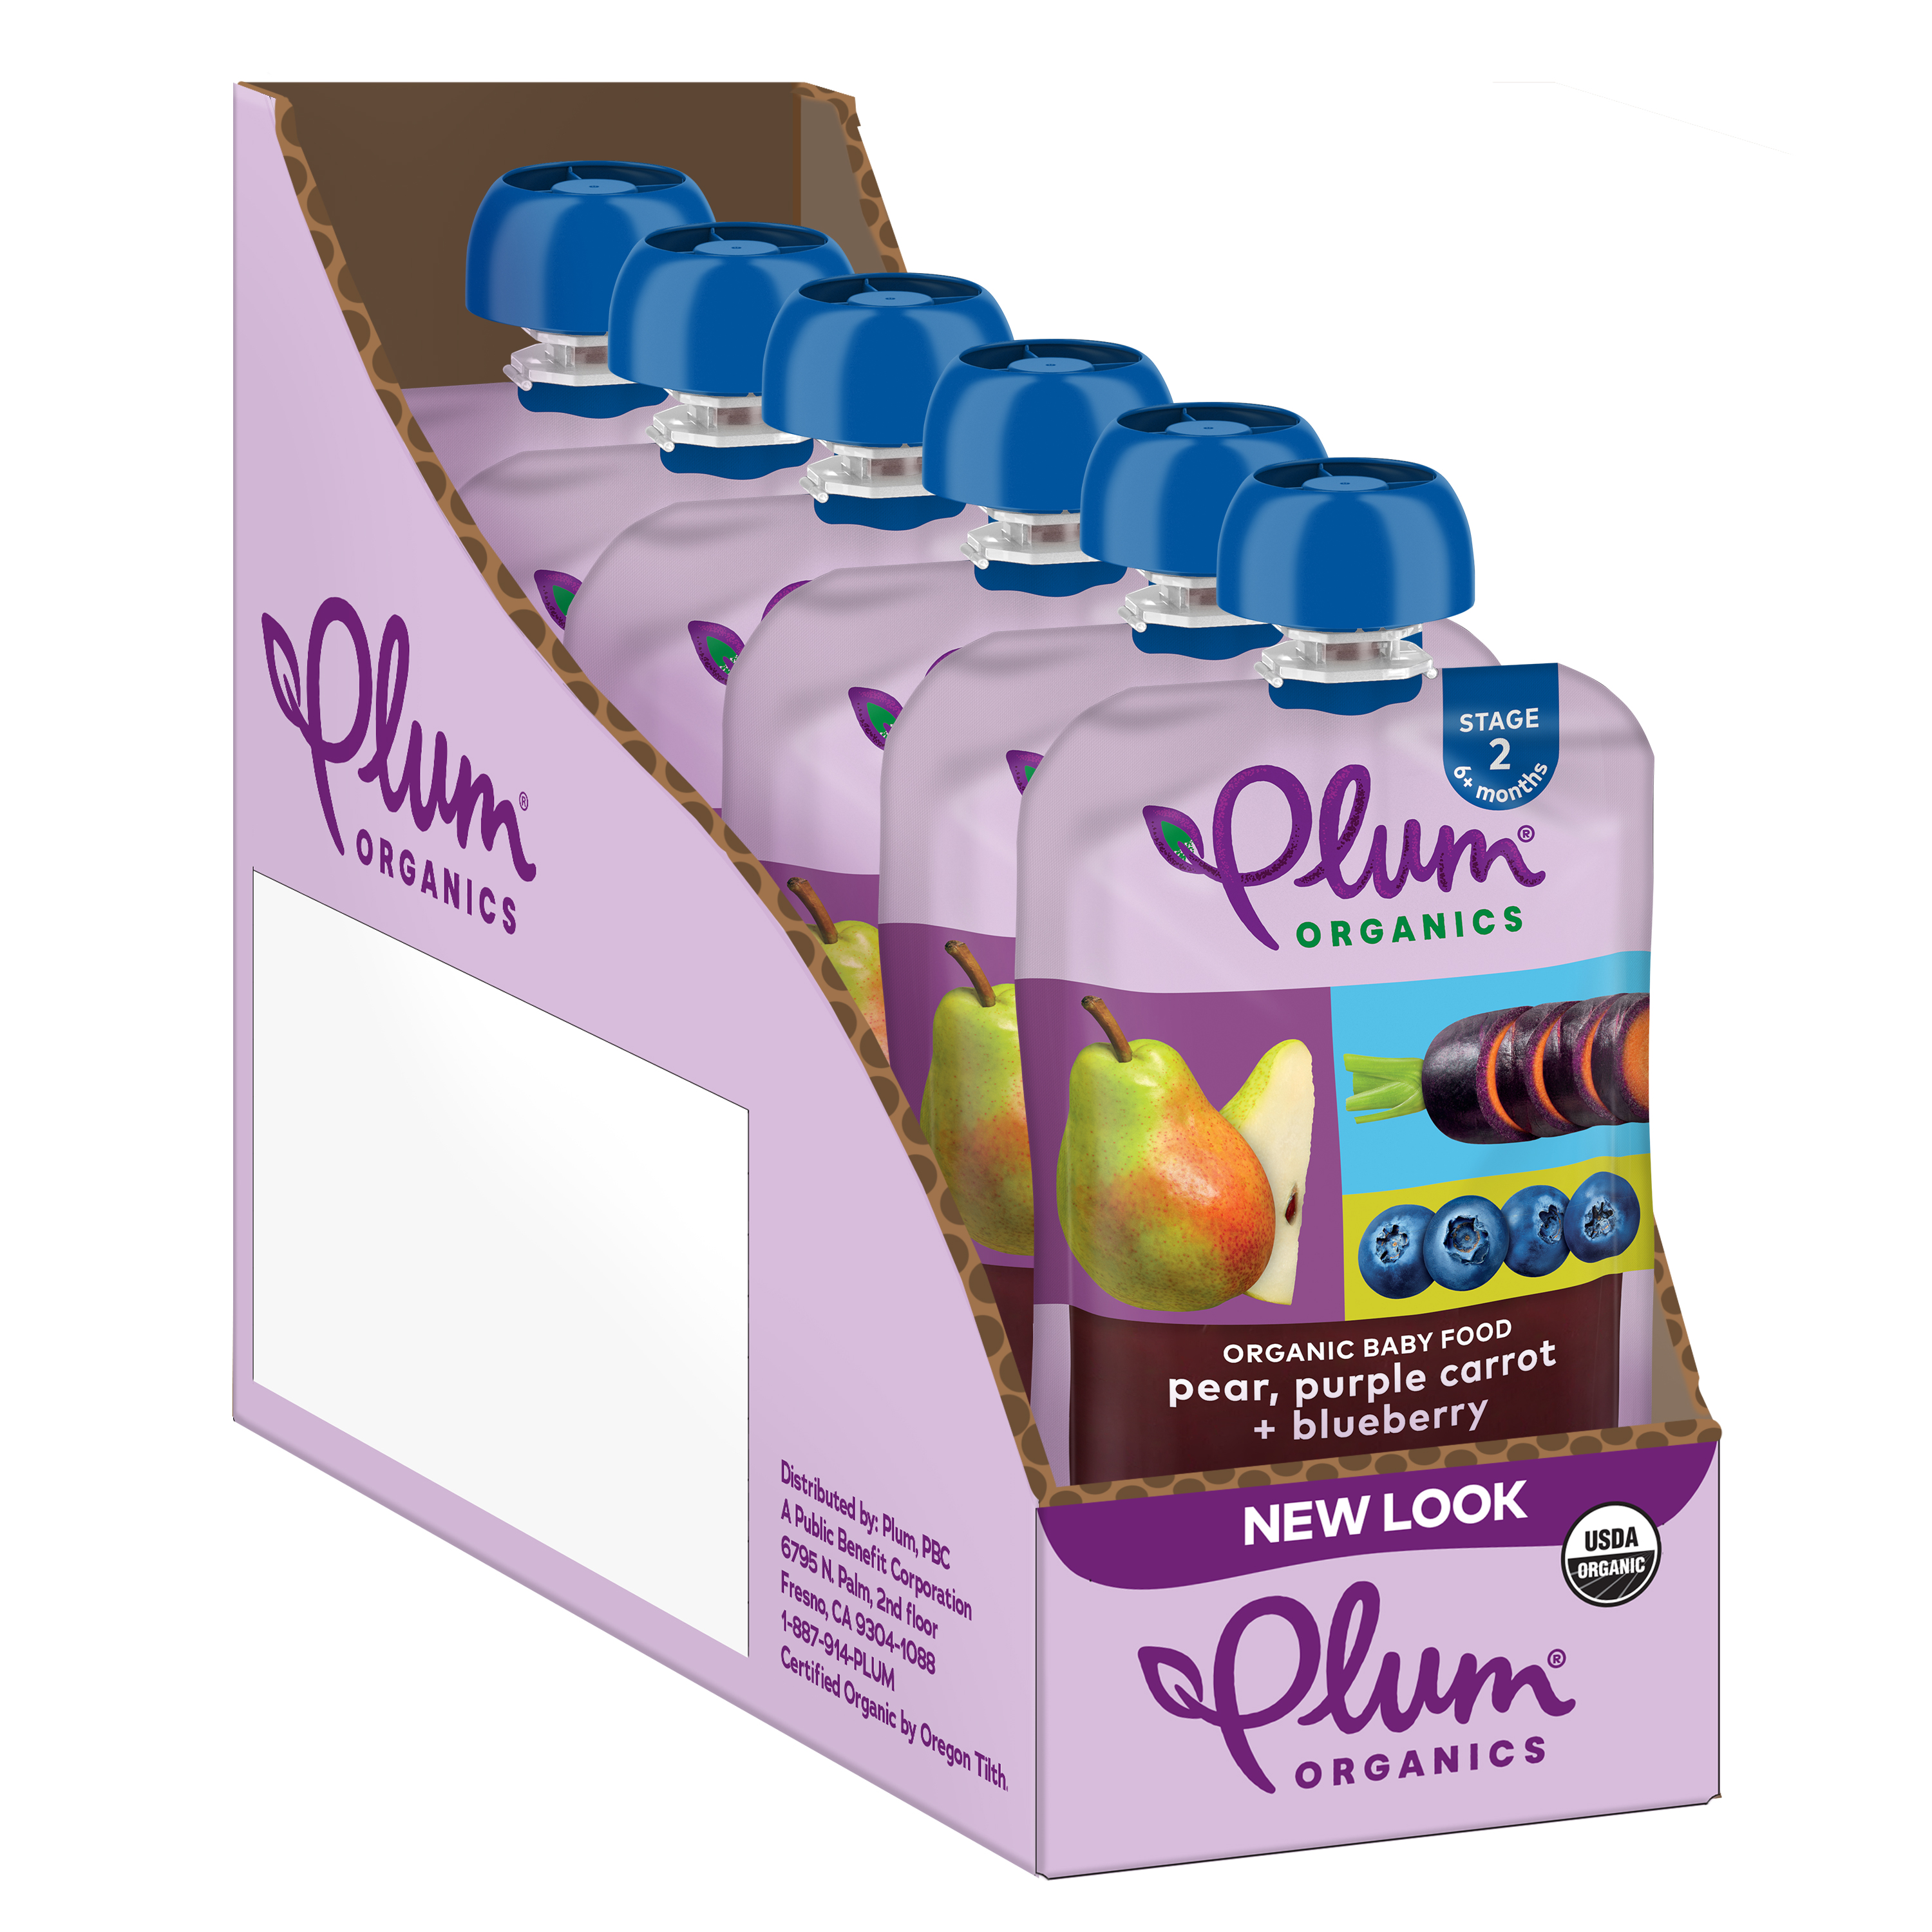 Plum Organics Stage 2 Organic Baby Food Pouches: Pear, Purple Carrot, Blueberry - 4 oz, 6 Pack - image 1 of 9